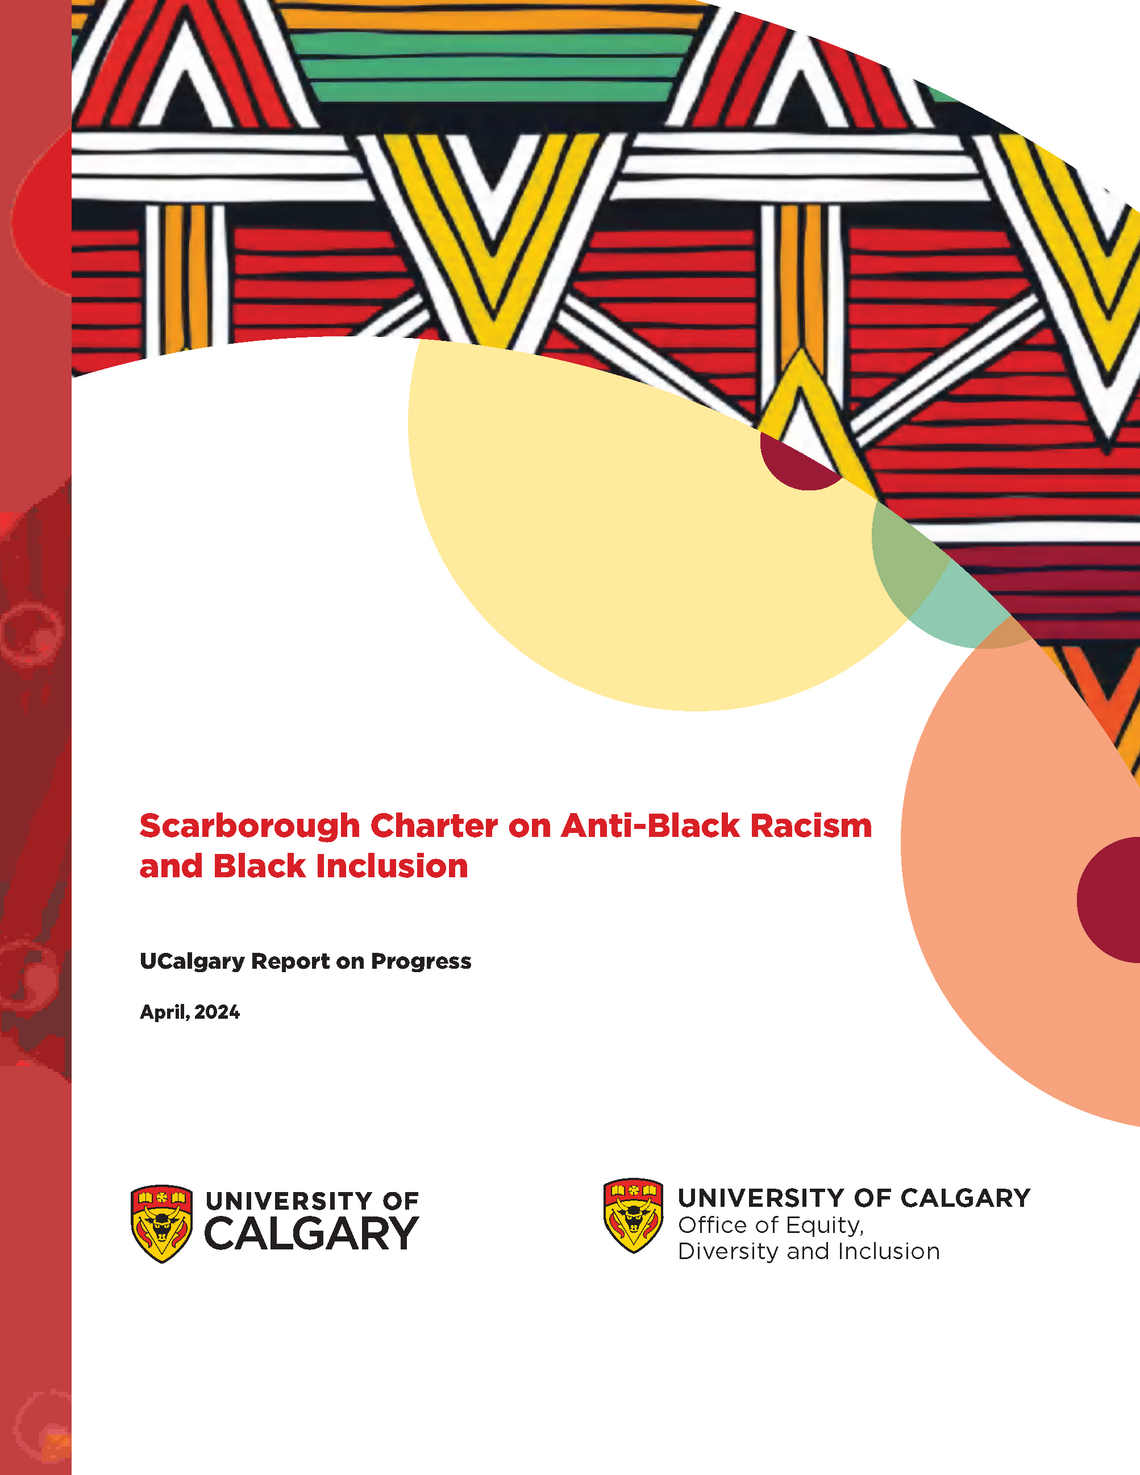 The Scarborough Charter on Anti-Black Racism and Black Inclusion - UCalgary APR2024